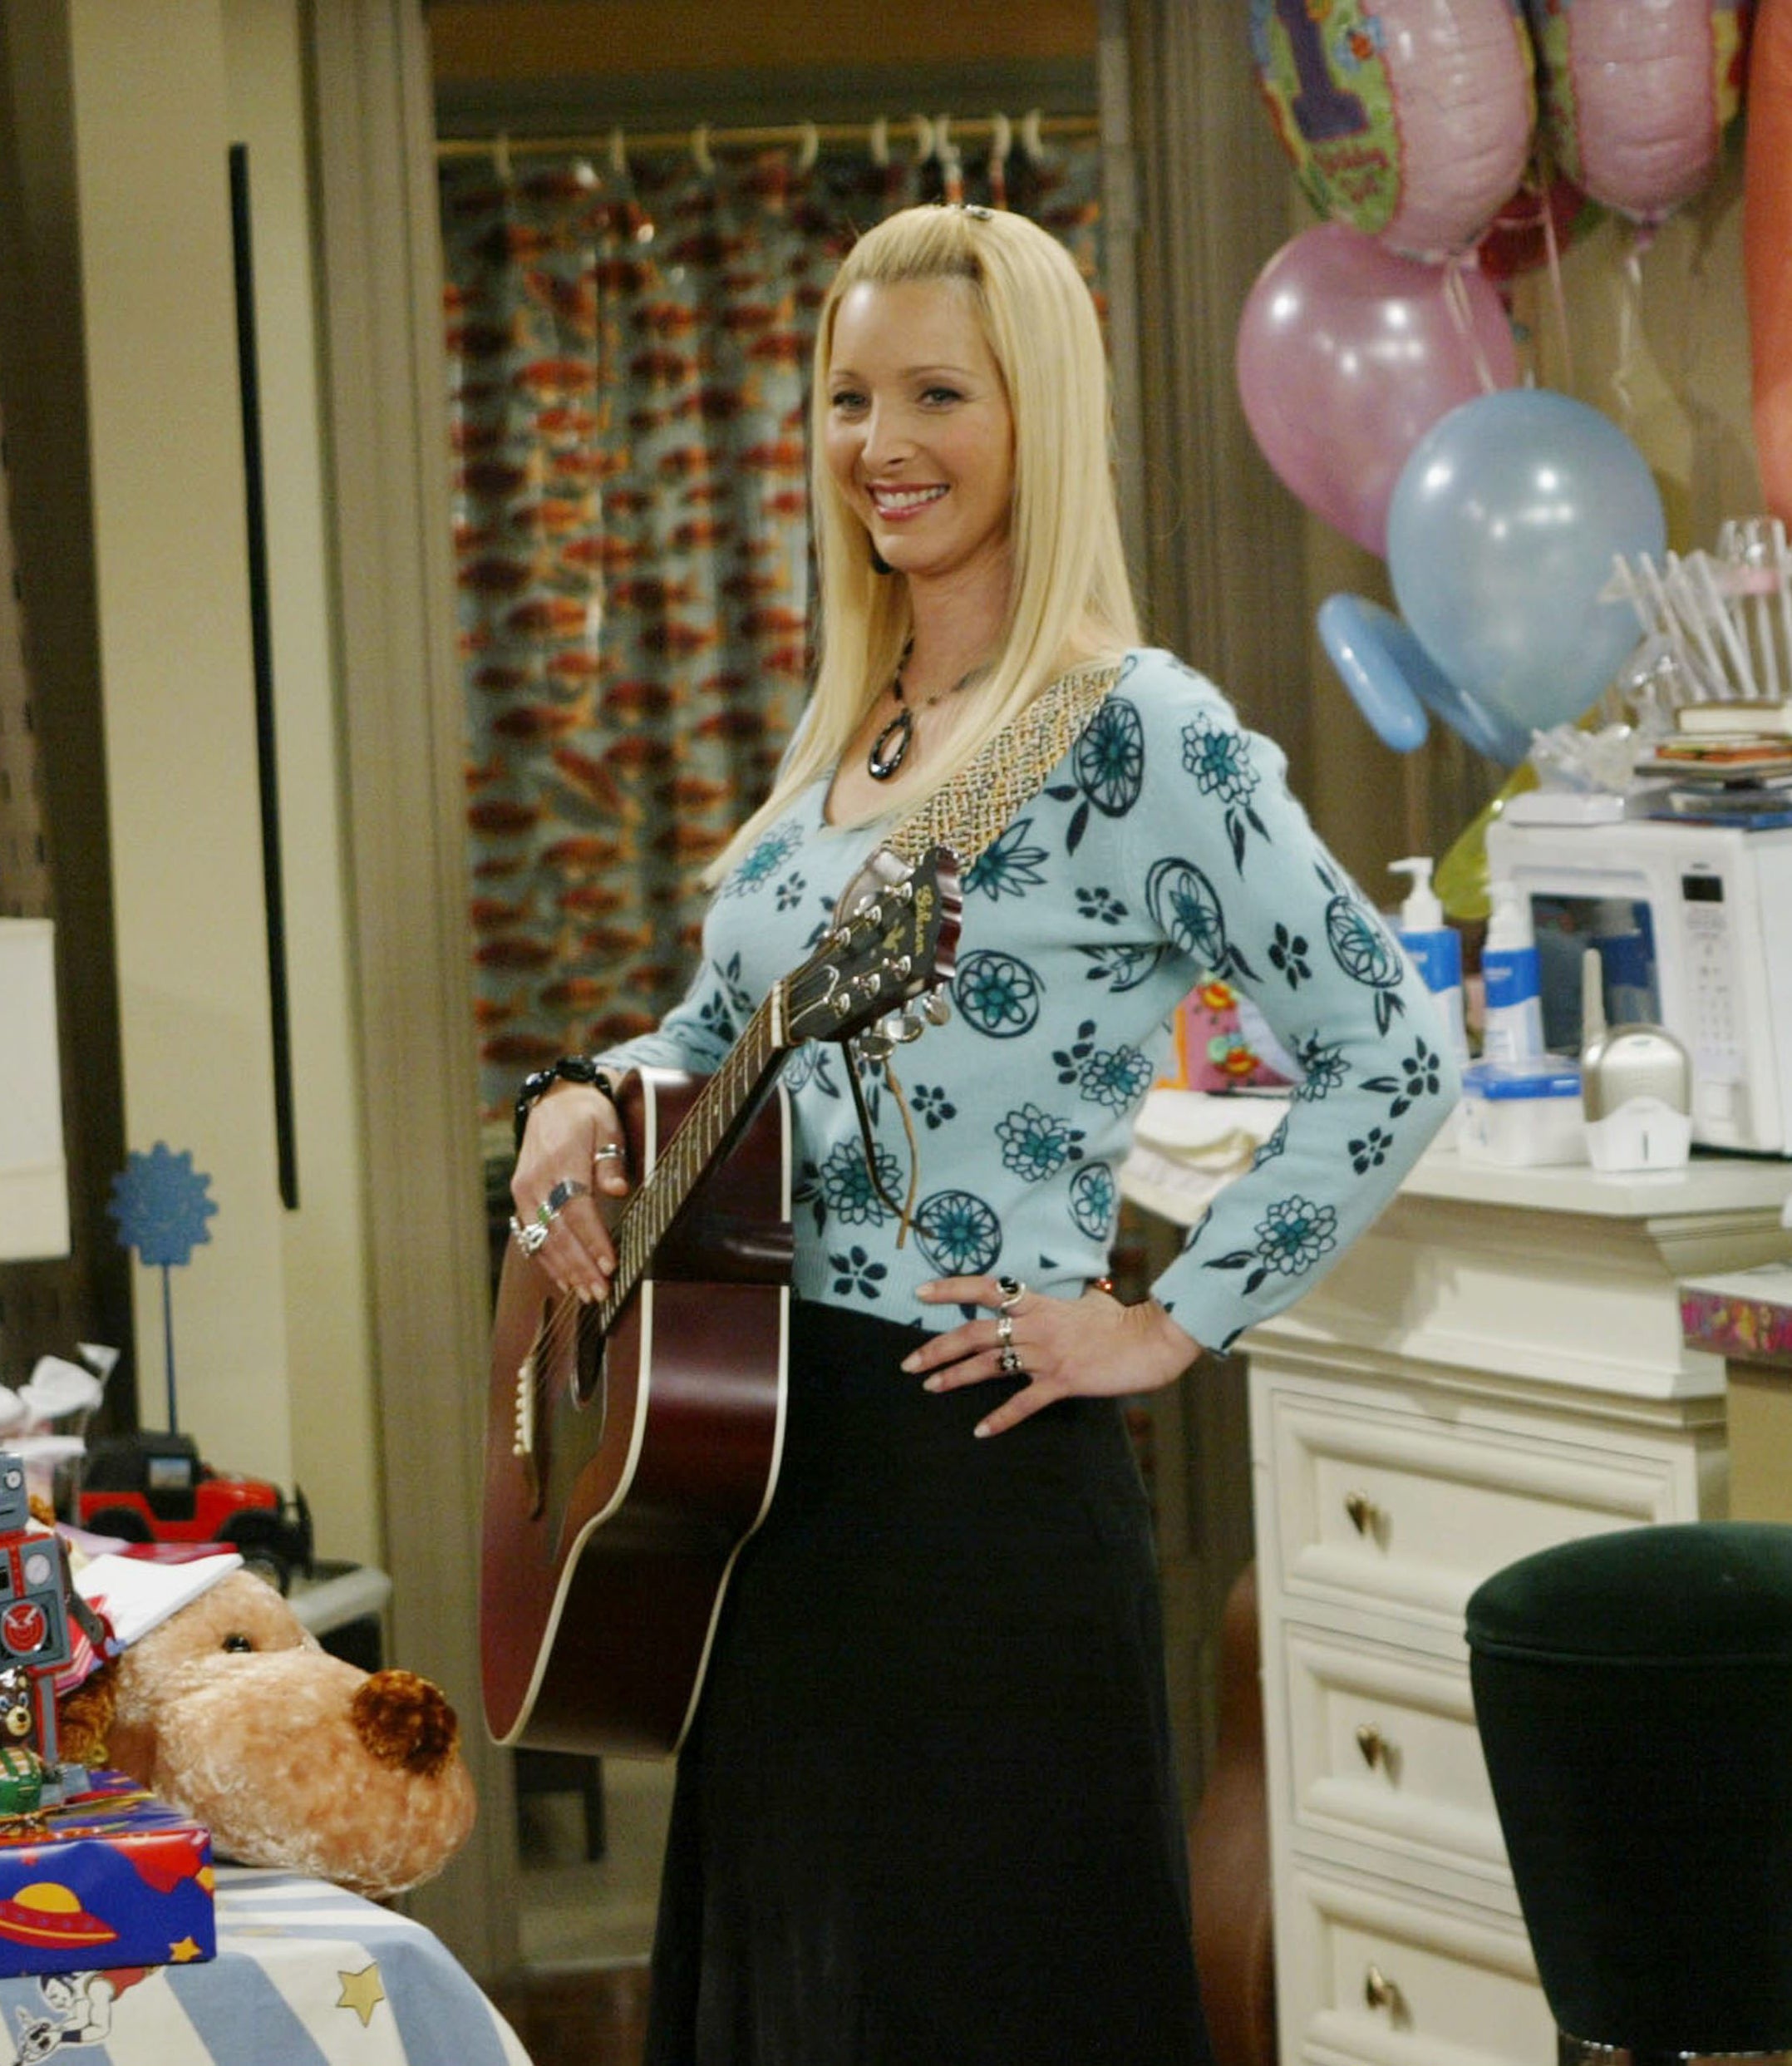 Lisa Kudrow as her character Phoebe Buffay in Friends stands at a children&#x27;s party holding a guitar, with gifts, balloons, and party decorations around her